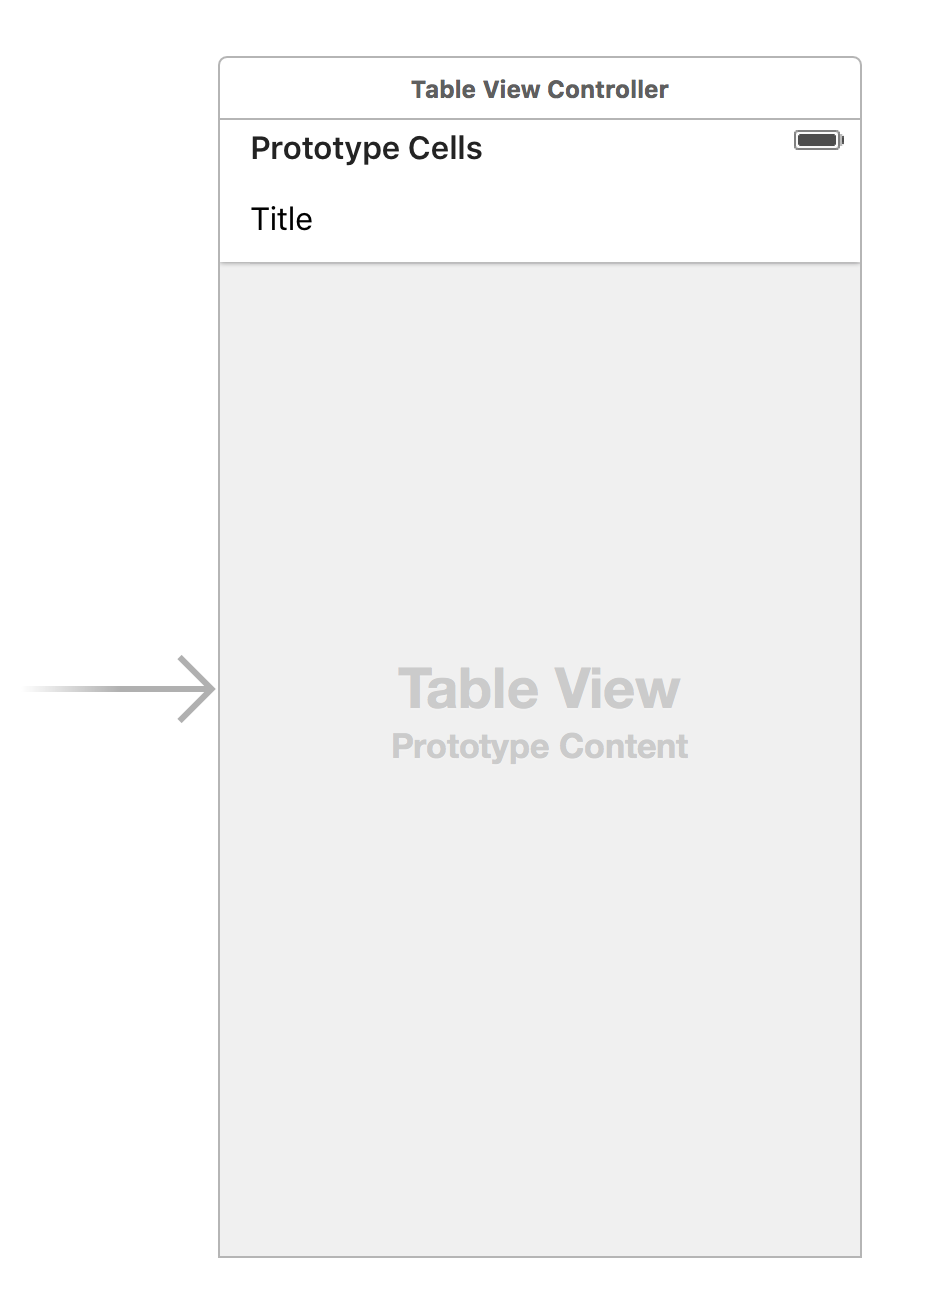 Table view in Xcode